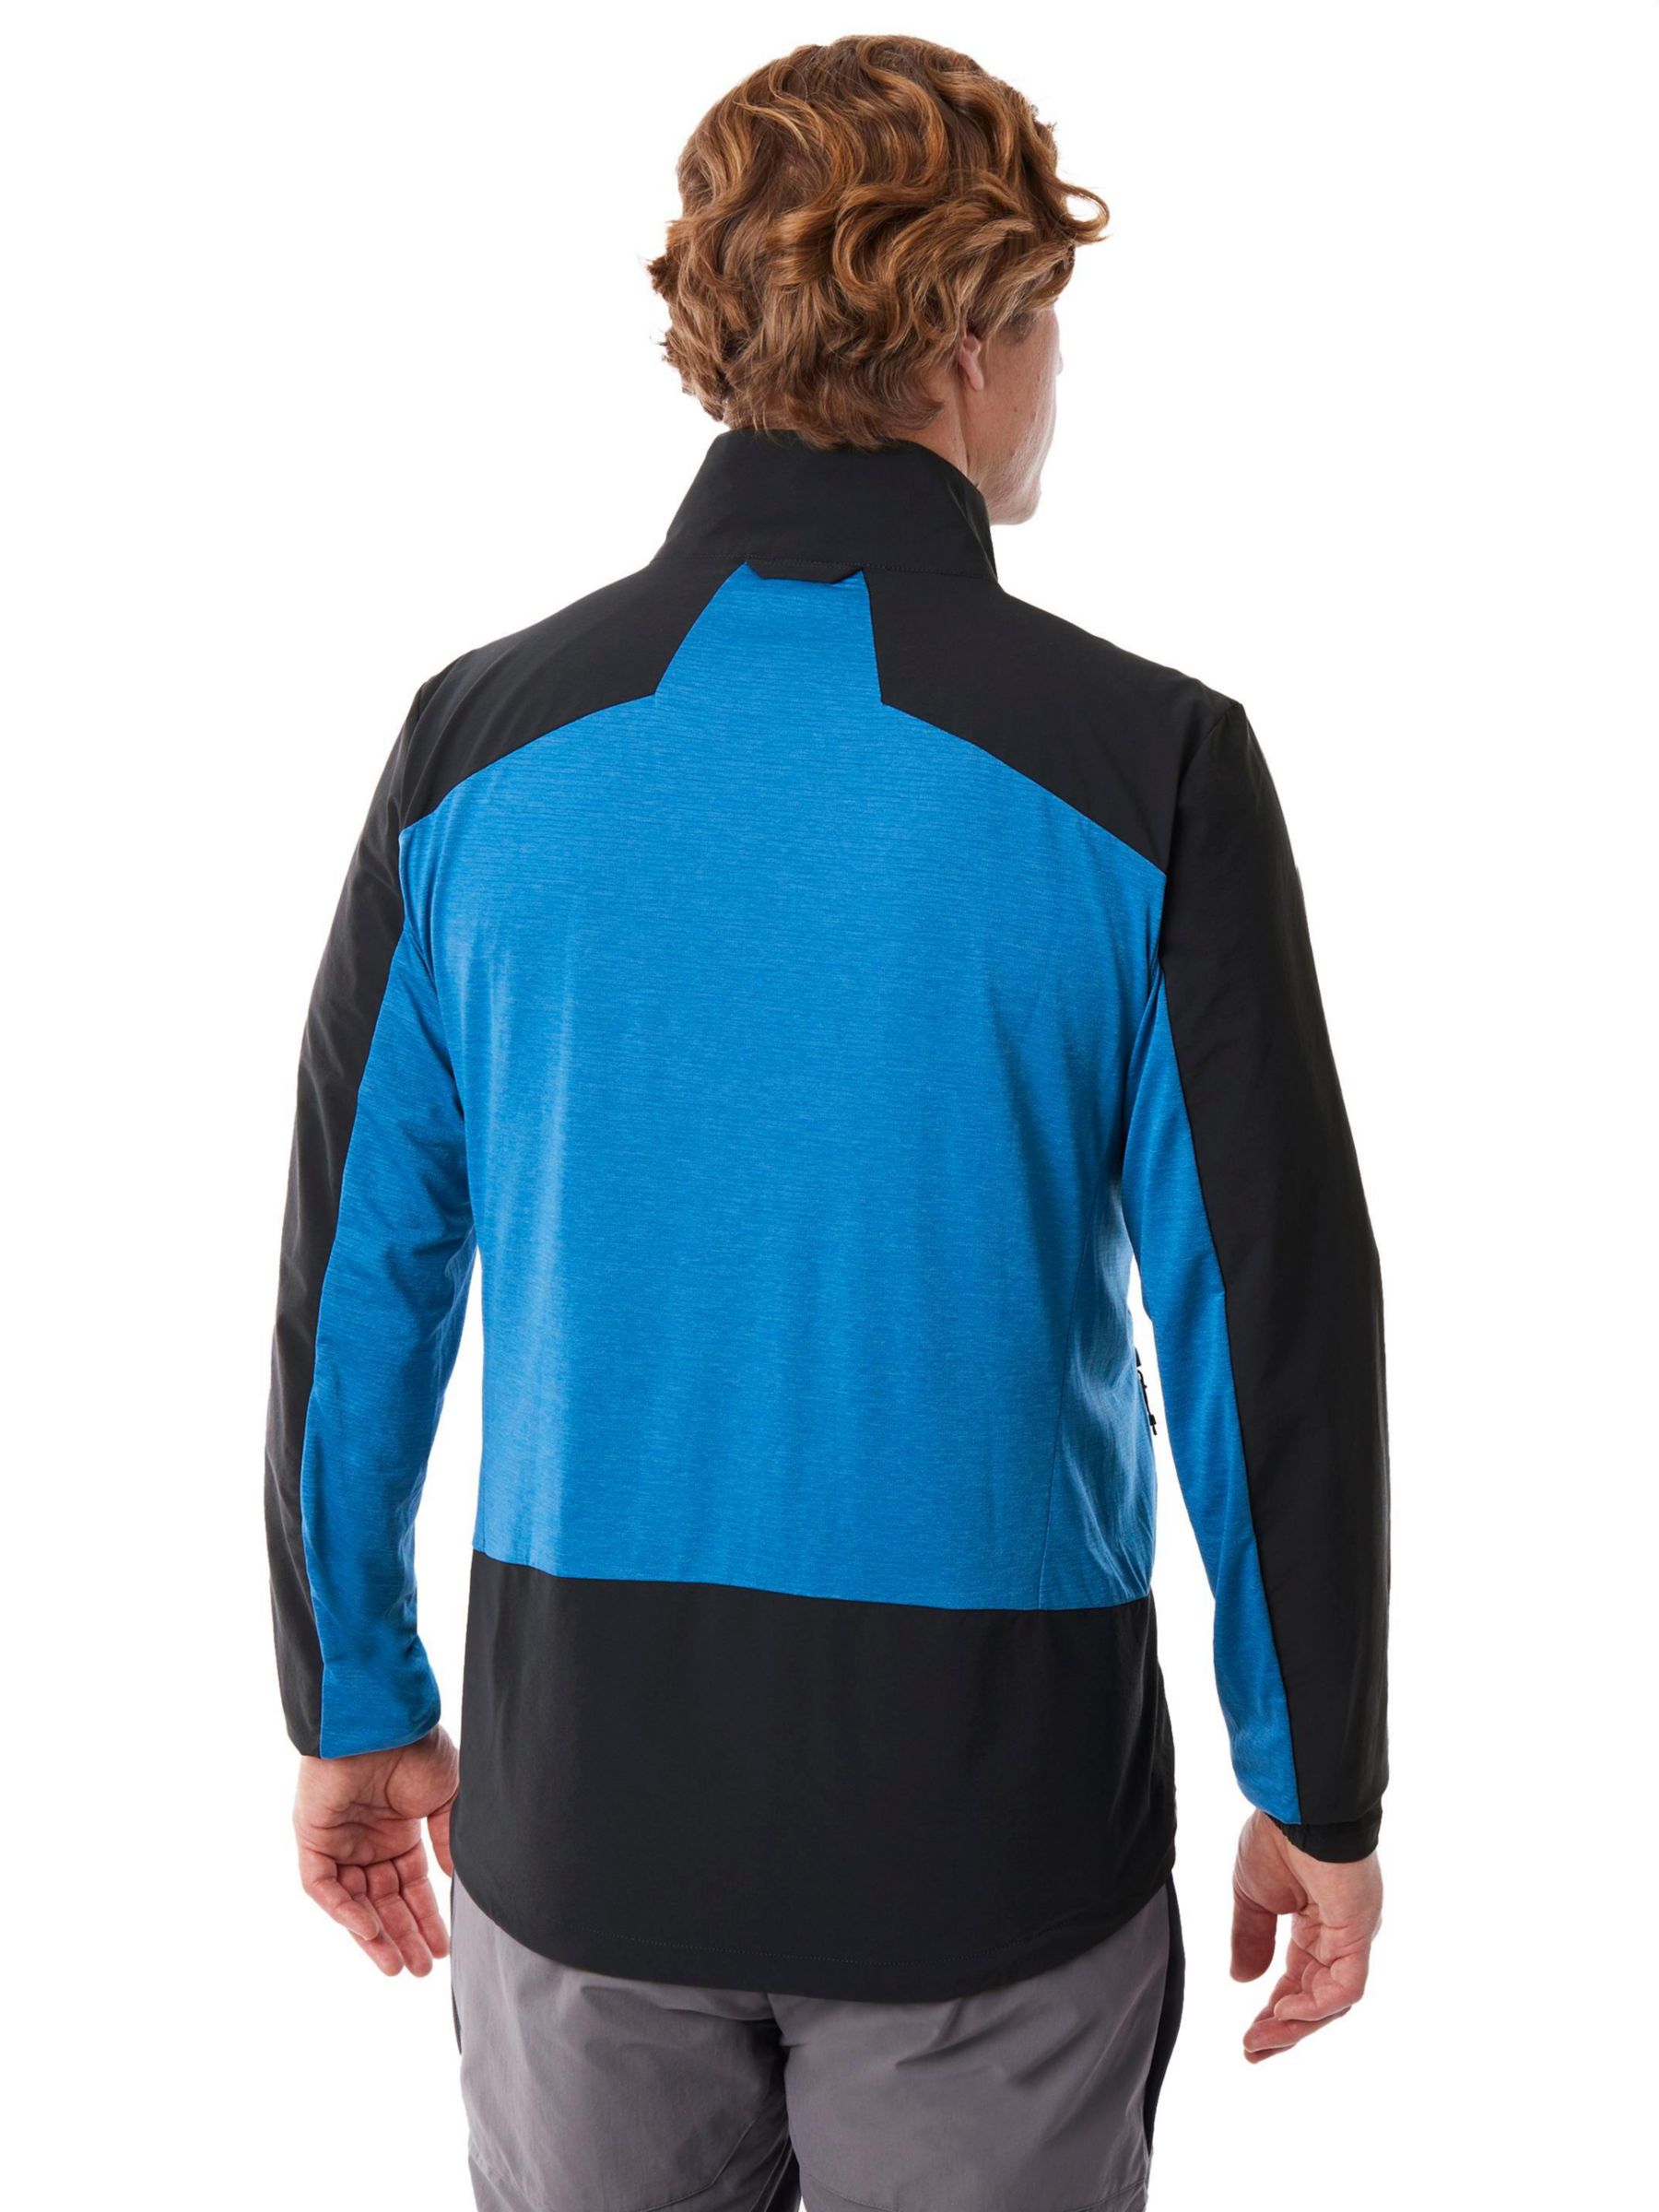 Buy Rohan Fjell Vapour Stretch Jacket, True Navy/Electric Blue Online at johnlewis.com